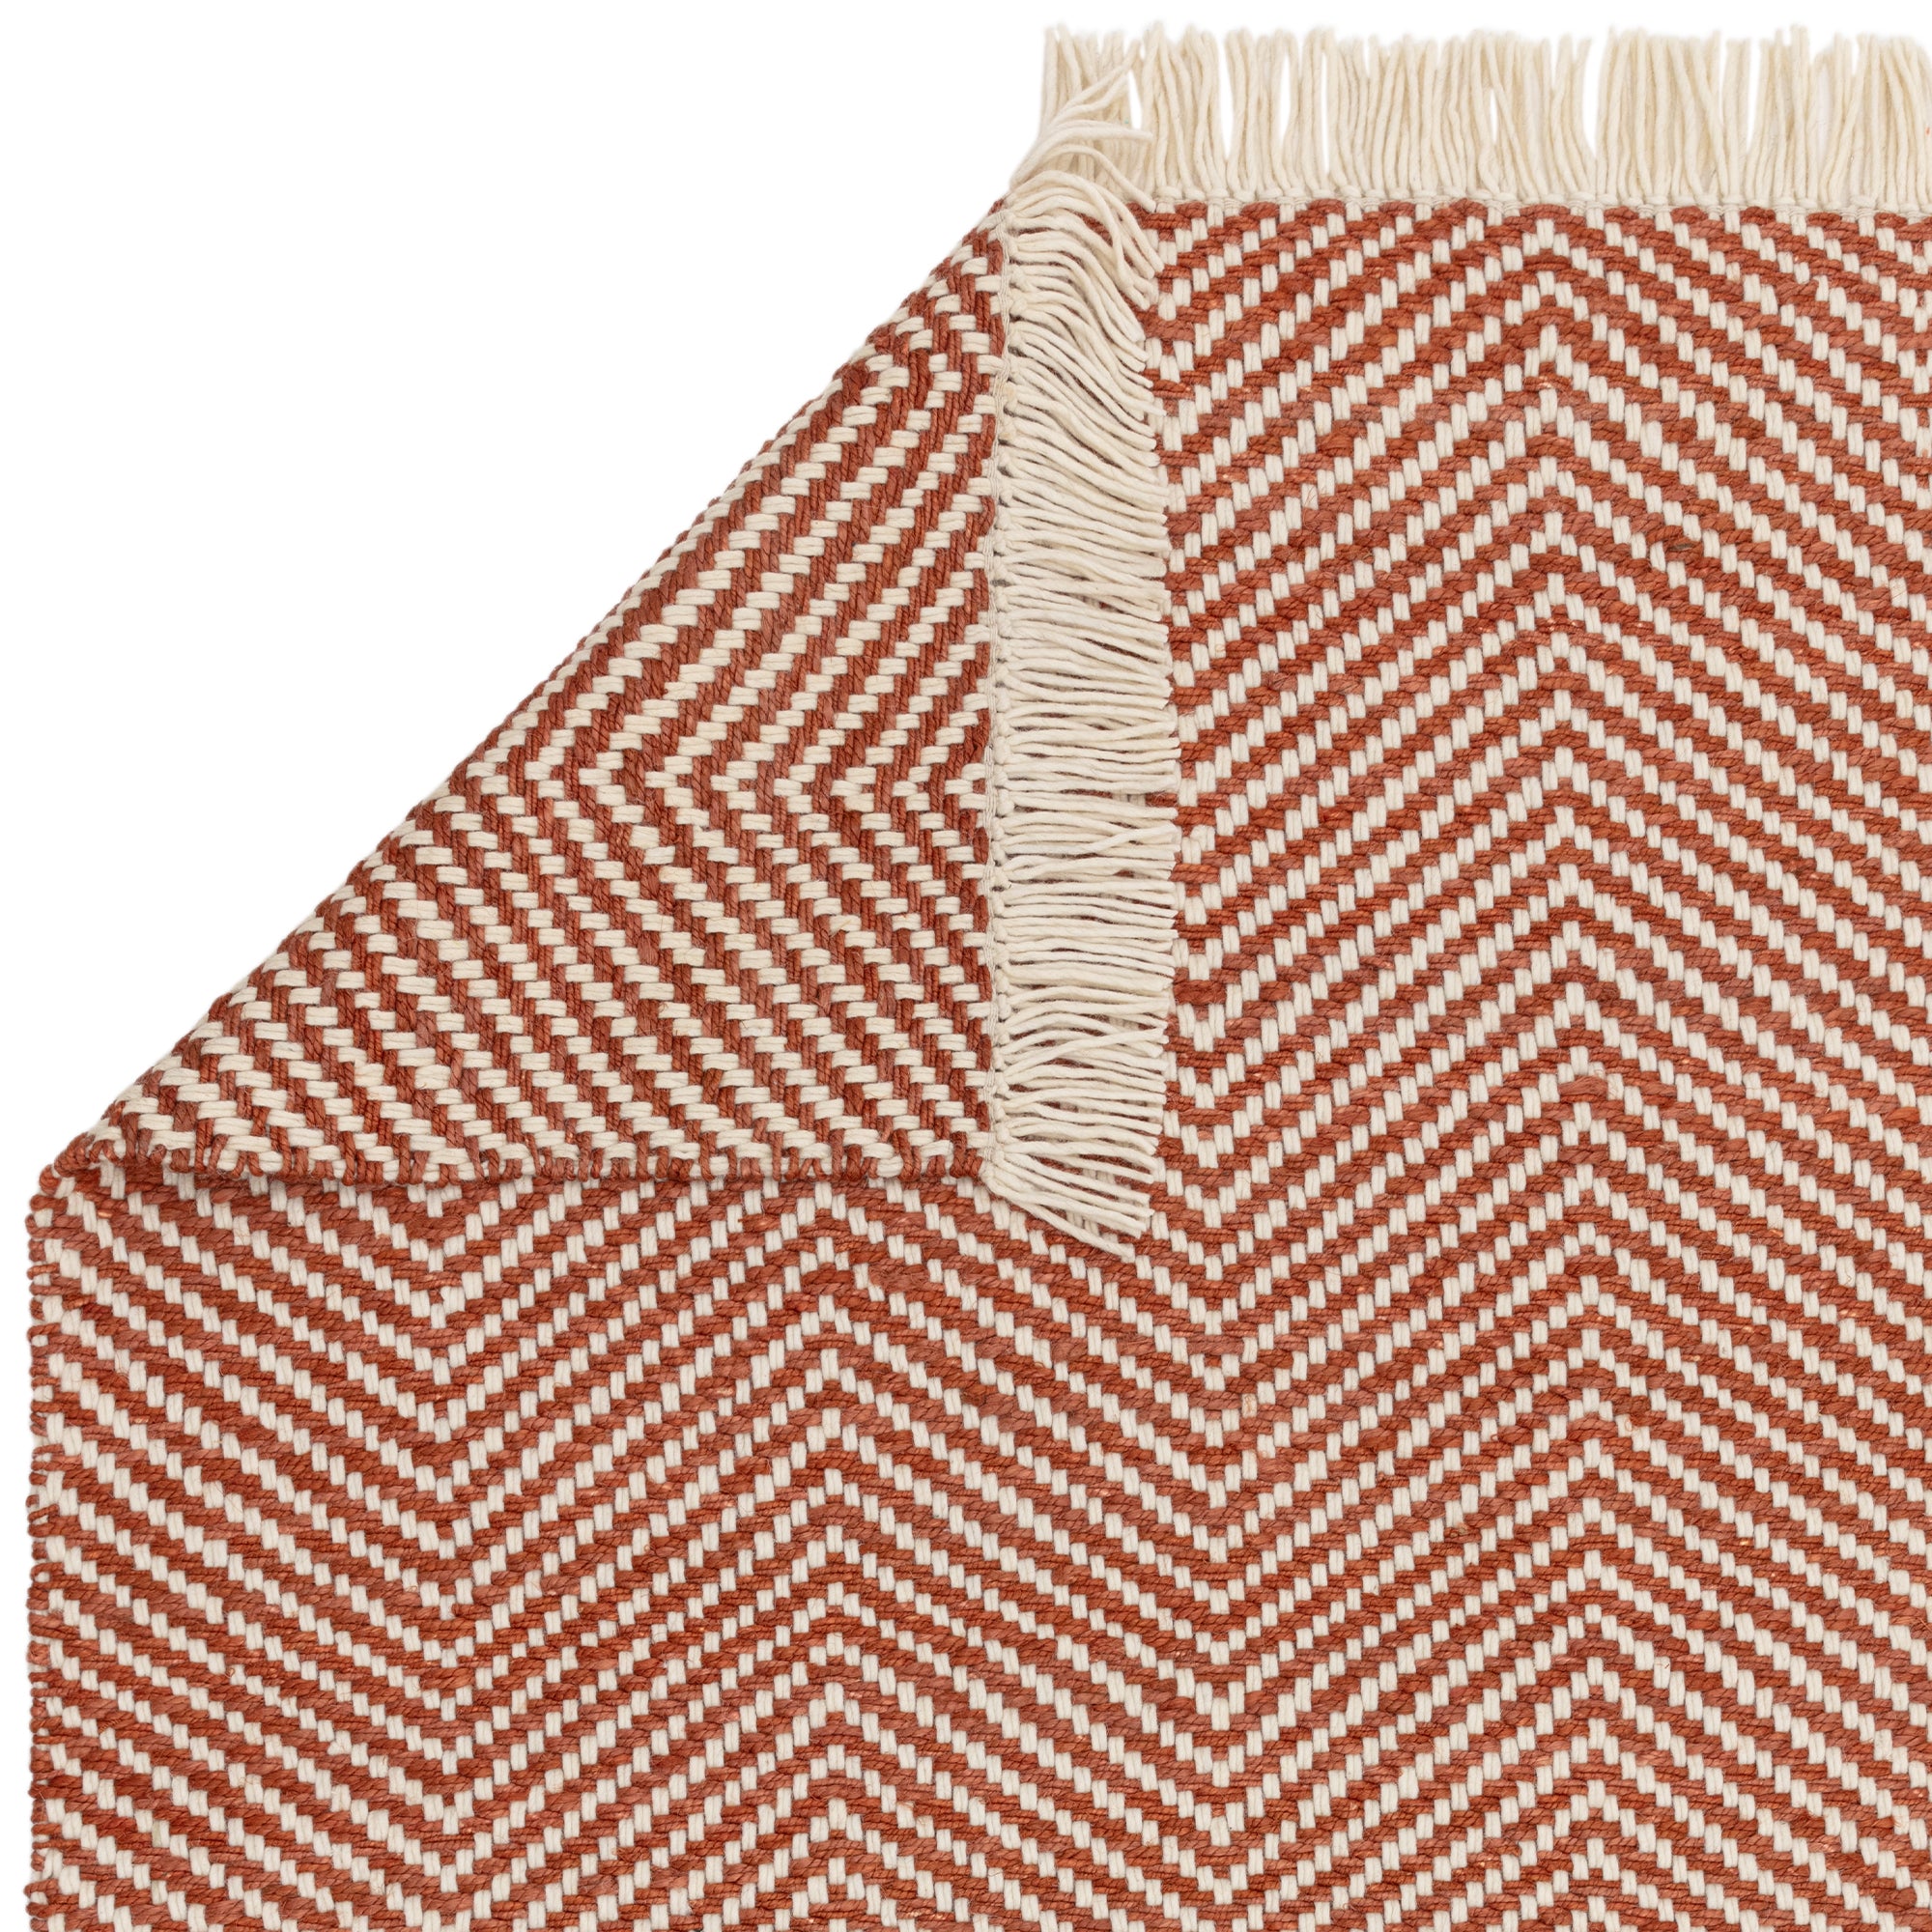 Textured woven rug with red and cream chevron pattern